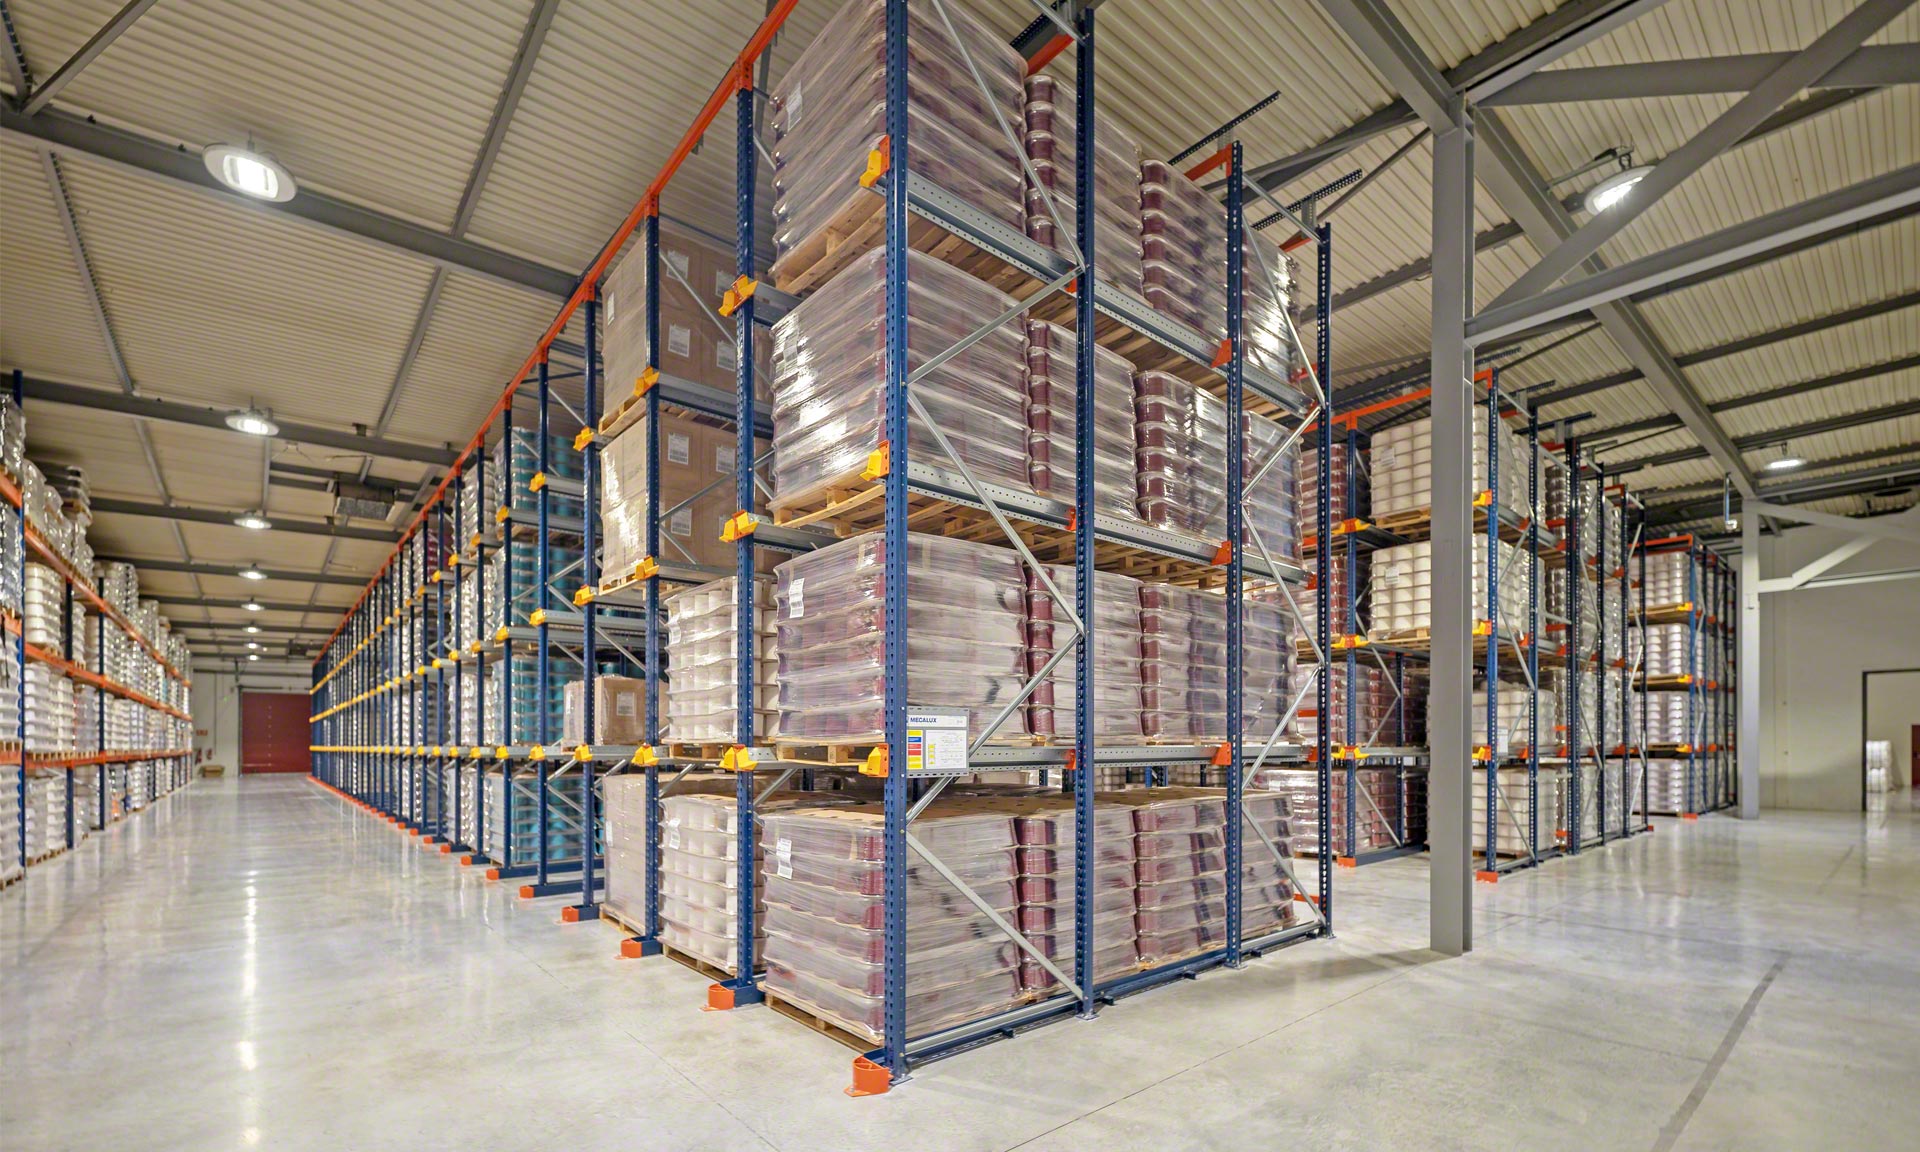 Selvafil modernises and leverages all its warehouse space